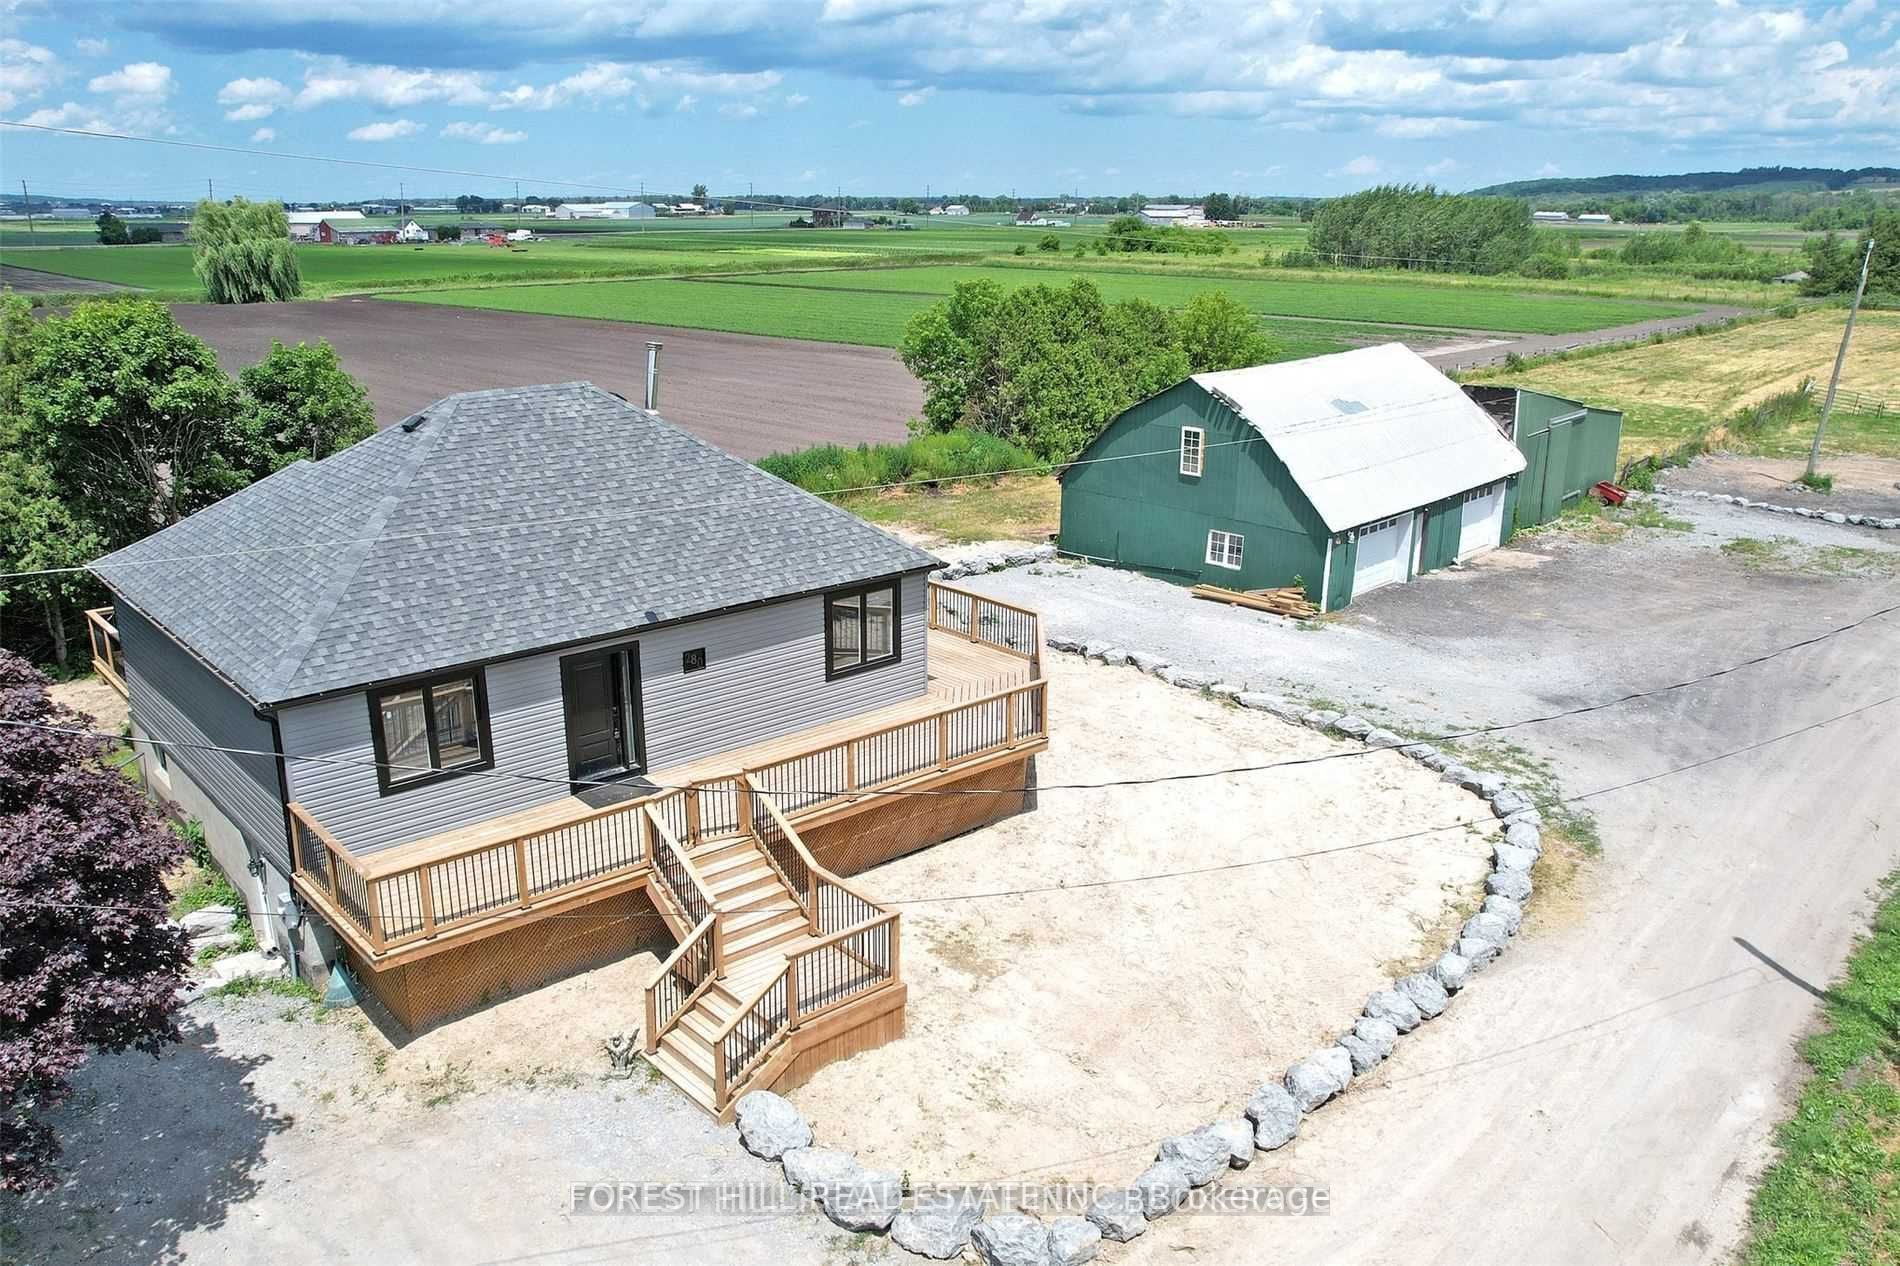 New property listed in Rural King, King